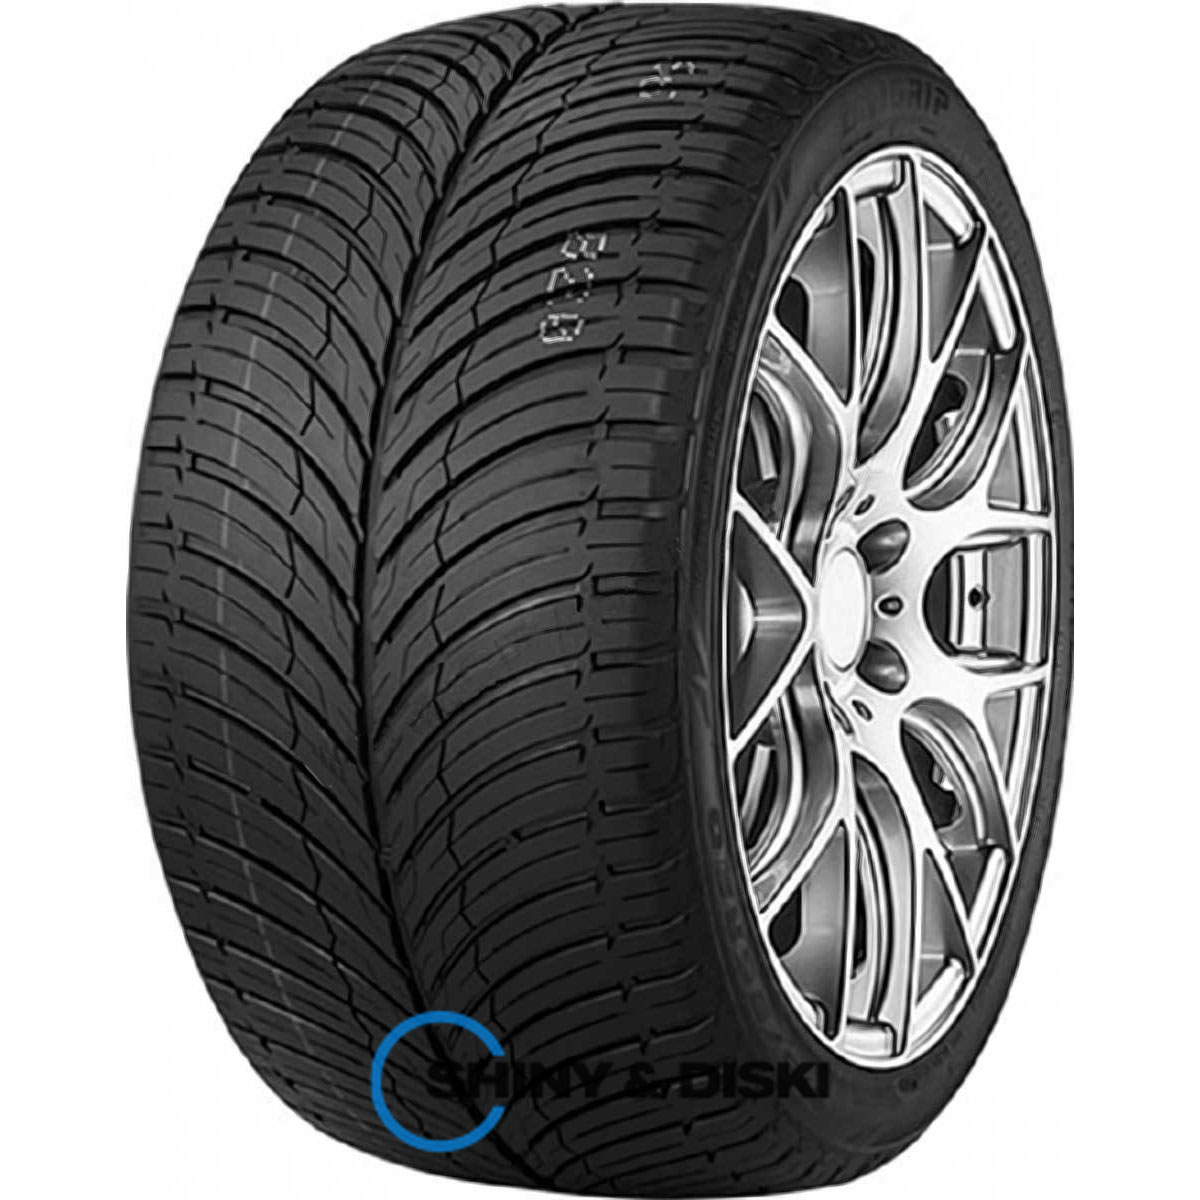 unigrip lateral force 4s 235/55 r18 100w